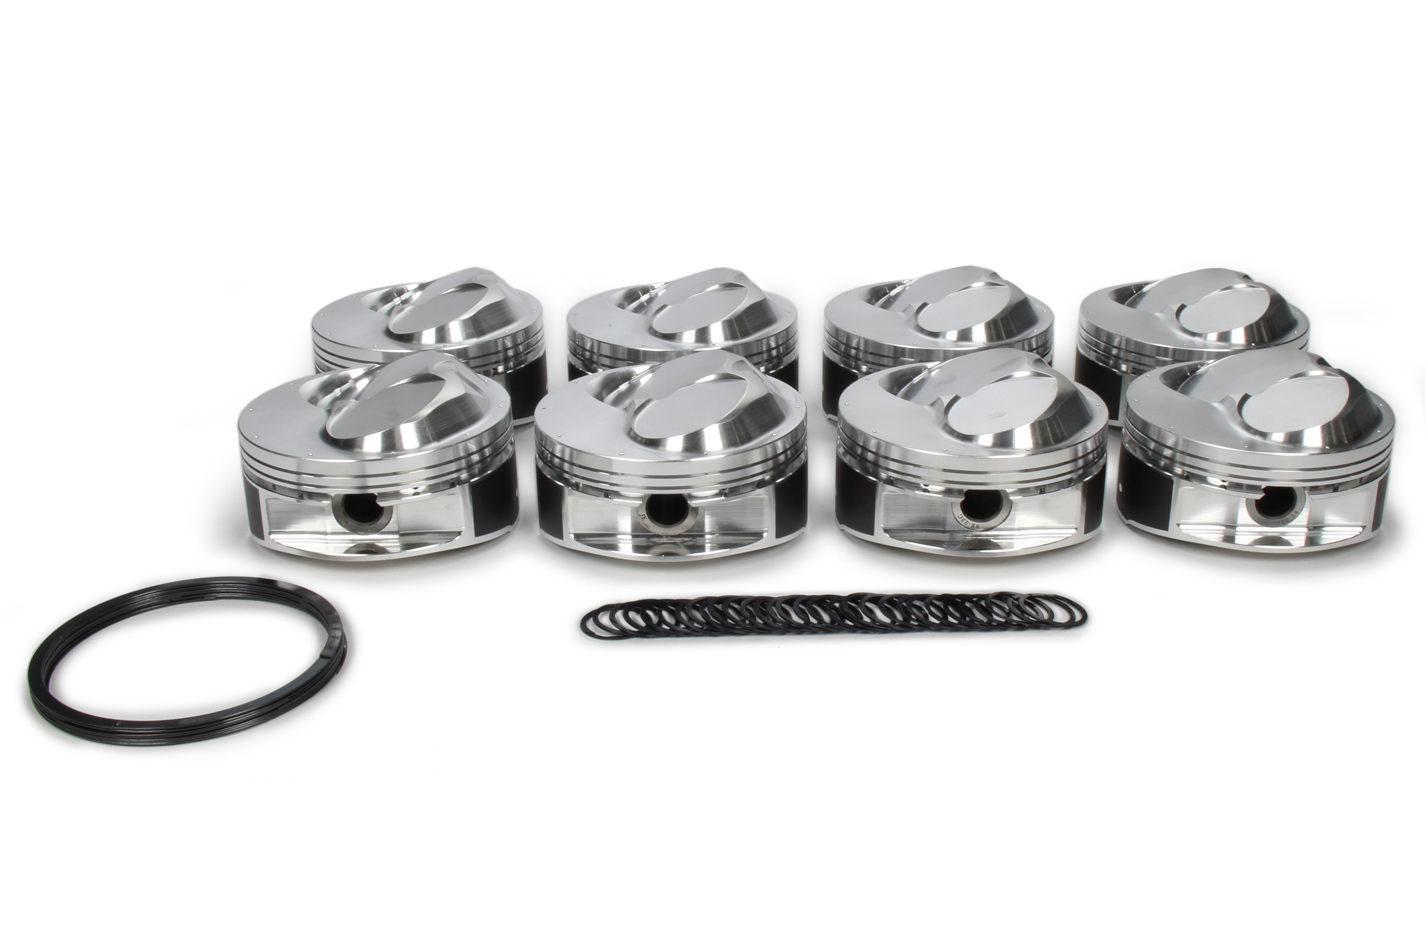 JE Pistons 243328 Piston, Open Chamber Dome GP, Forged, 4.610 in Bore, 0.043 in x 0.043 in x 3.0 mm Ring Grooves, Plus 43.00 cc, Big Block Chevy, Set of 8